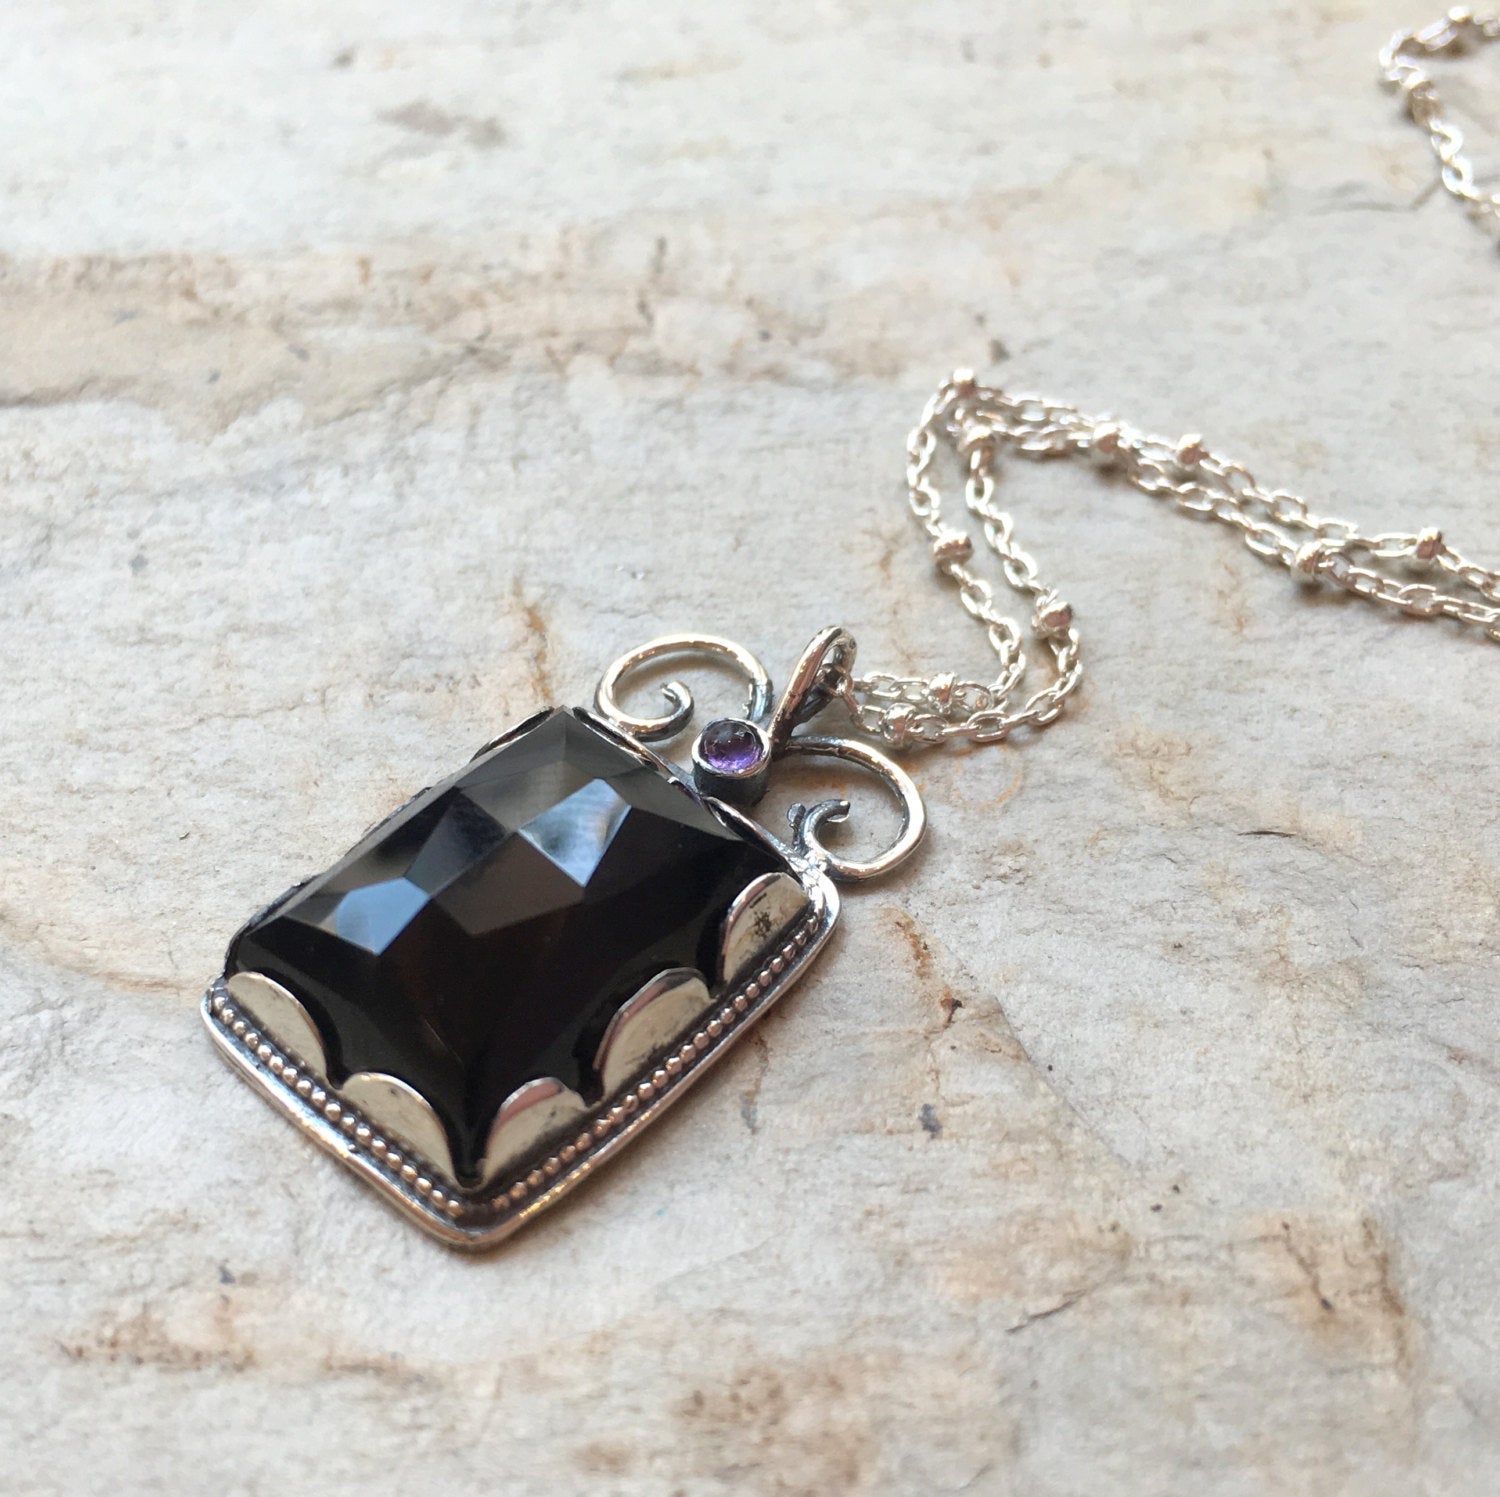 Onyx amethyst Necklace, gemstone necklace, Sterling silver pendant, bridal necklace, black pendant, crown setting - Once upon a time. N8837